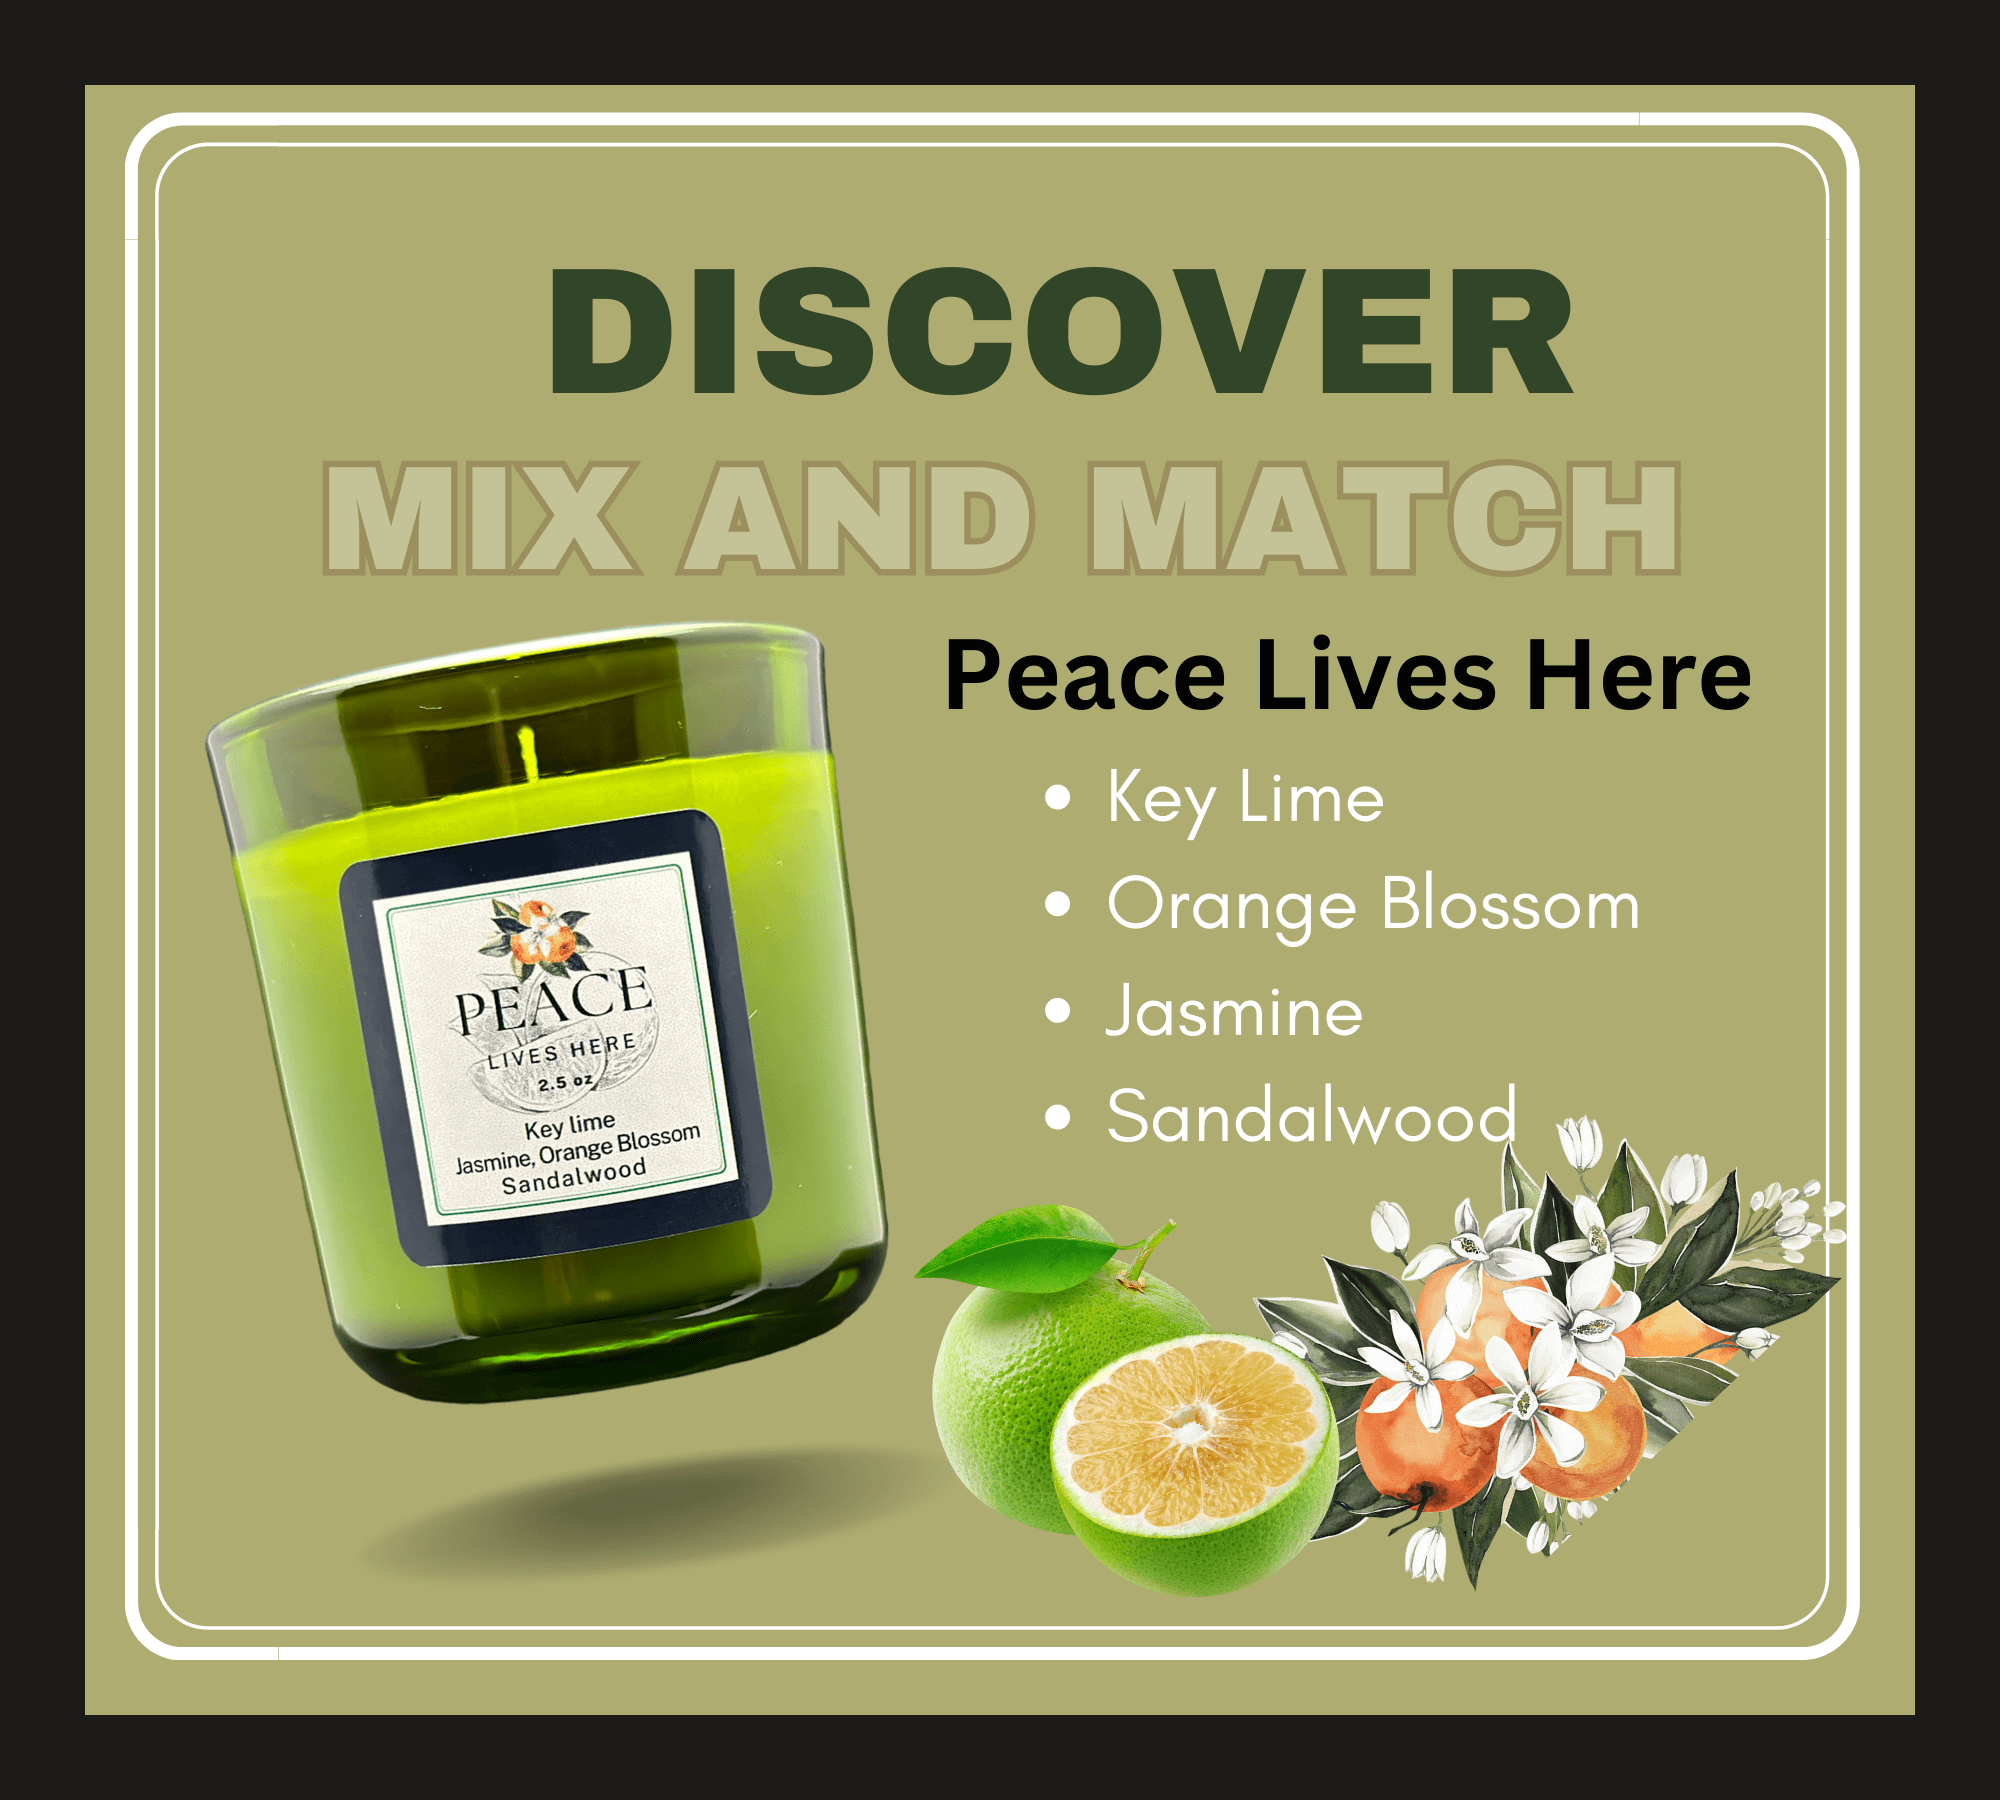 Peace lives here candle. Key lime and orange blossom. Fragrance discovery set.